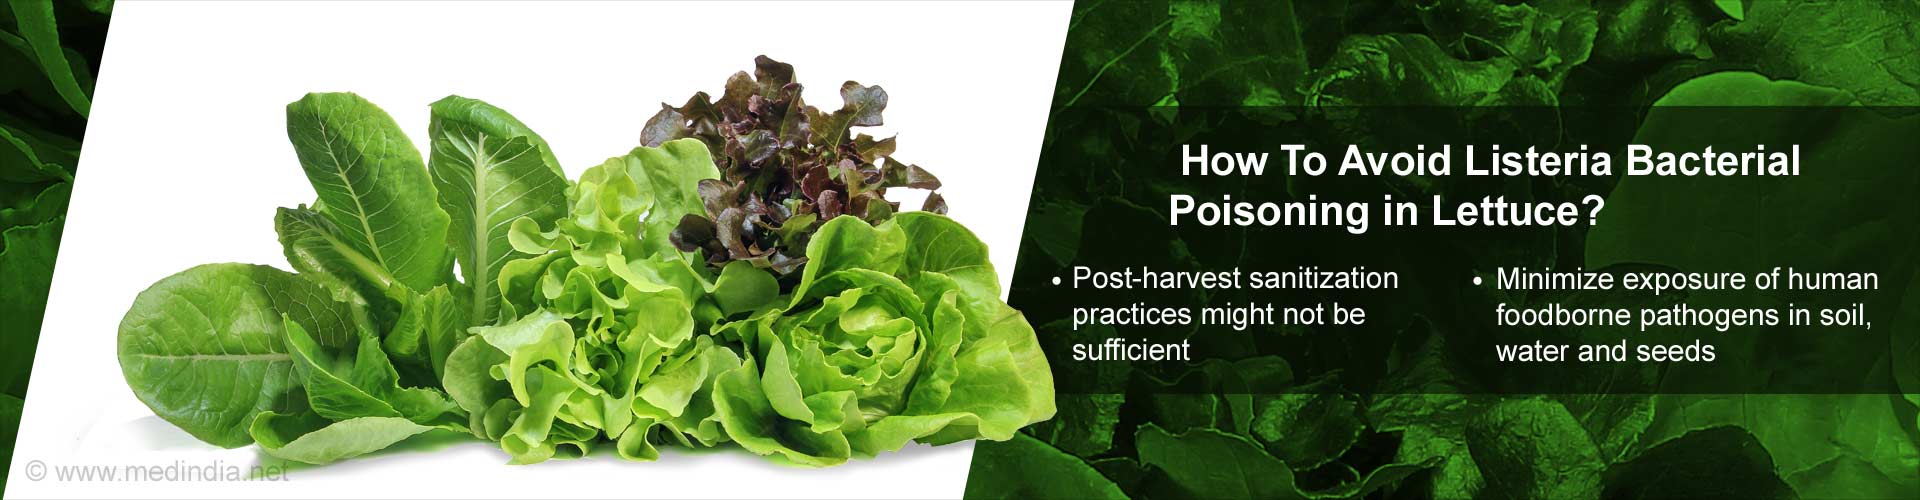 How to avoid listeria bacterial poisoning in lettuce?
- post-harvest sanitizaion practices might not be sufficient
- minimize exposure of human foodborne pathogens in soil, water and seeds
